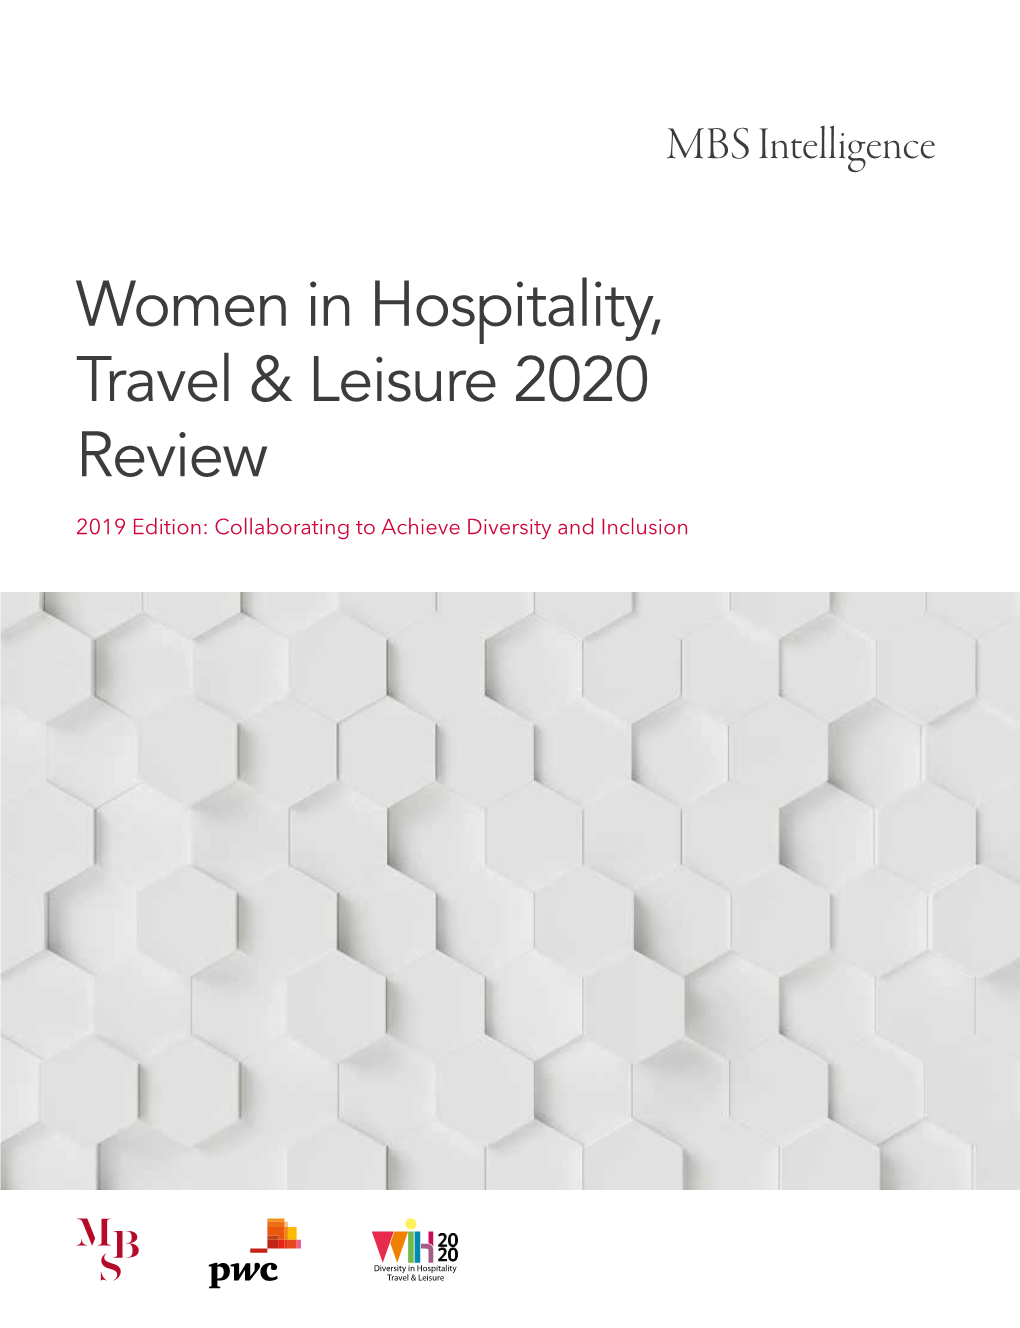 Women in Hospitality, Travel & Leisure 2020 Review